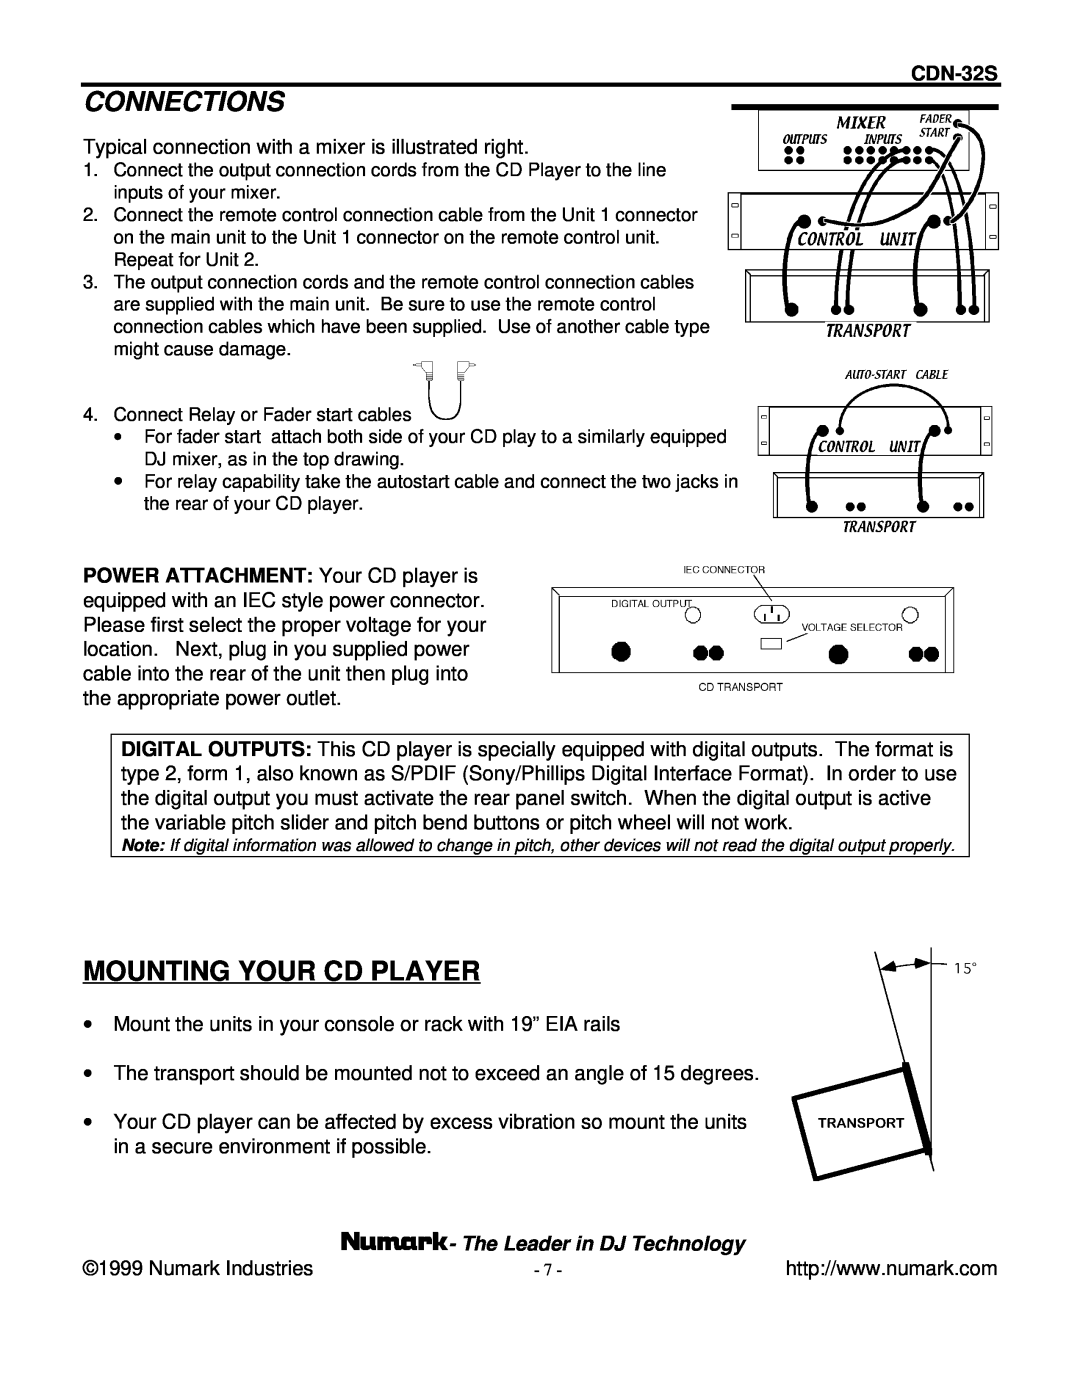 Numark Industries CDN-32S manual Connections, Mounting Your Cd Player, The Leader in DJ Technology 